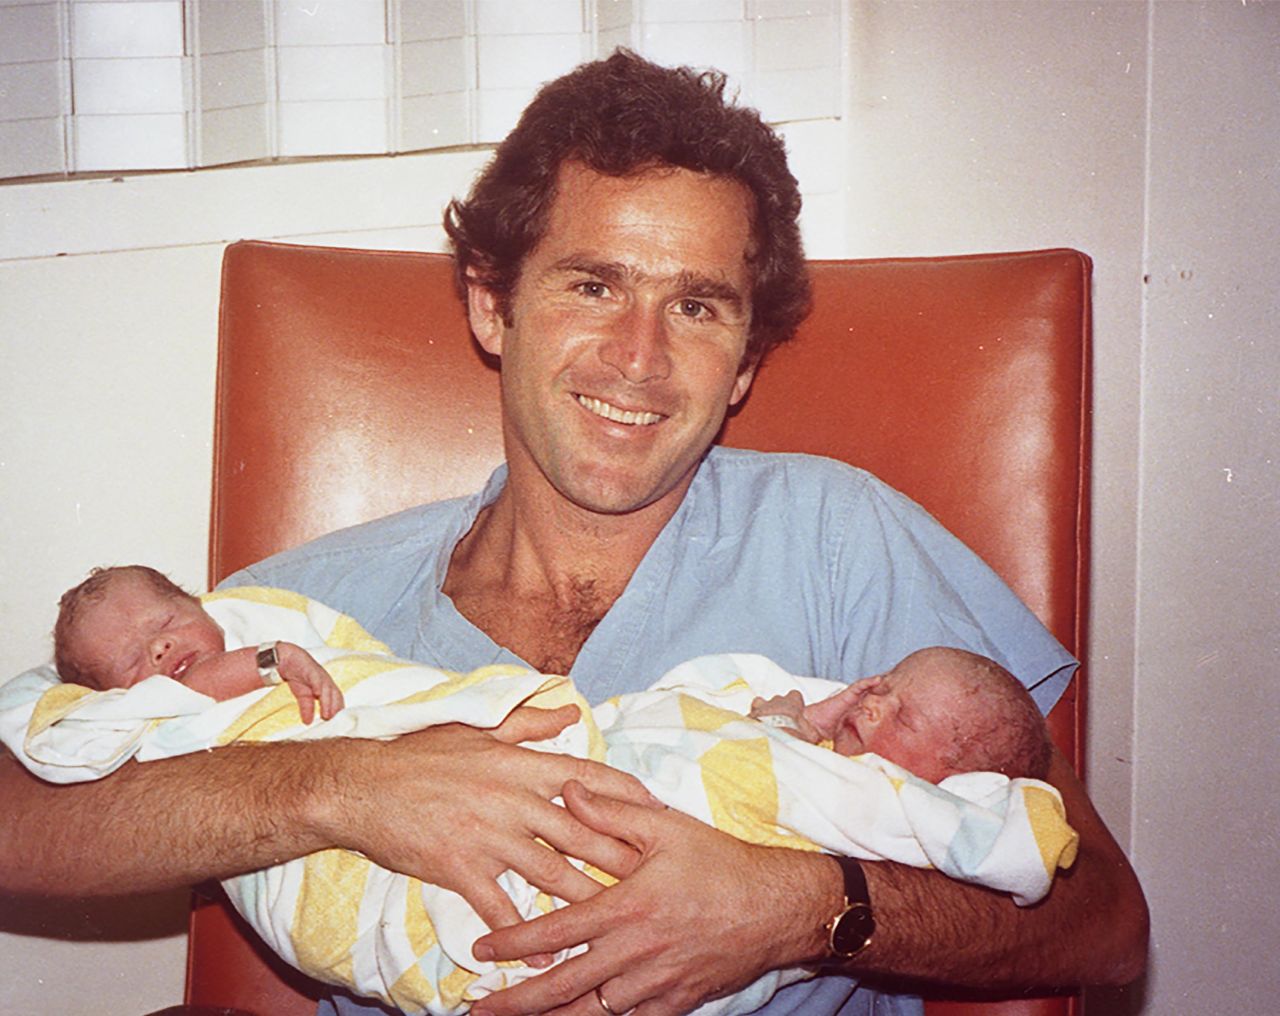 Bush holds his twin daughters, Barbara and Jenna, in 1981. At the time, he was the CEO of Arbusto Energy, an oil exploration firm he founded in 1977.